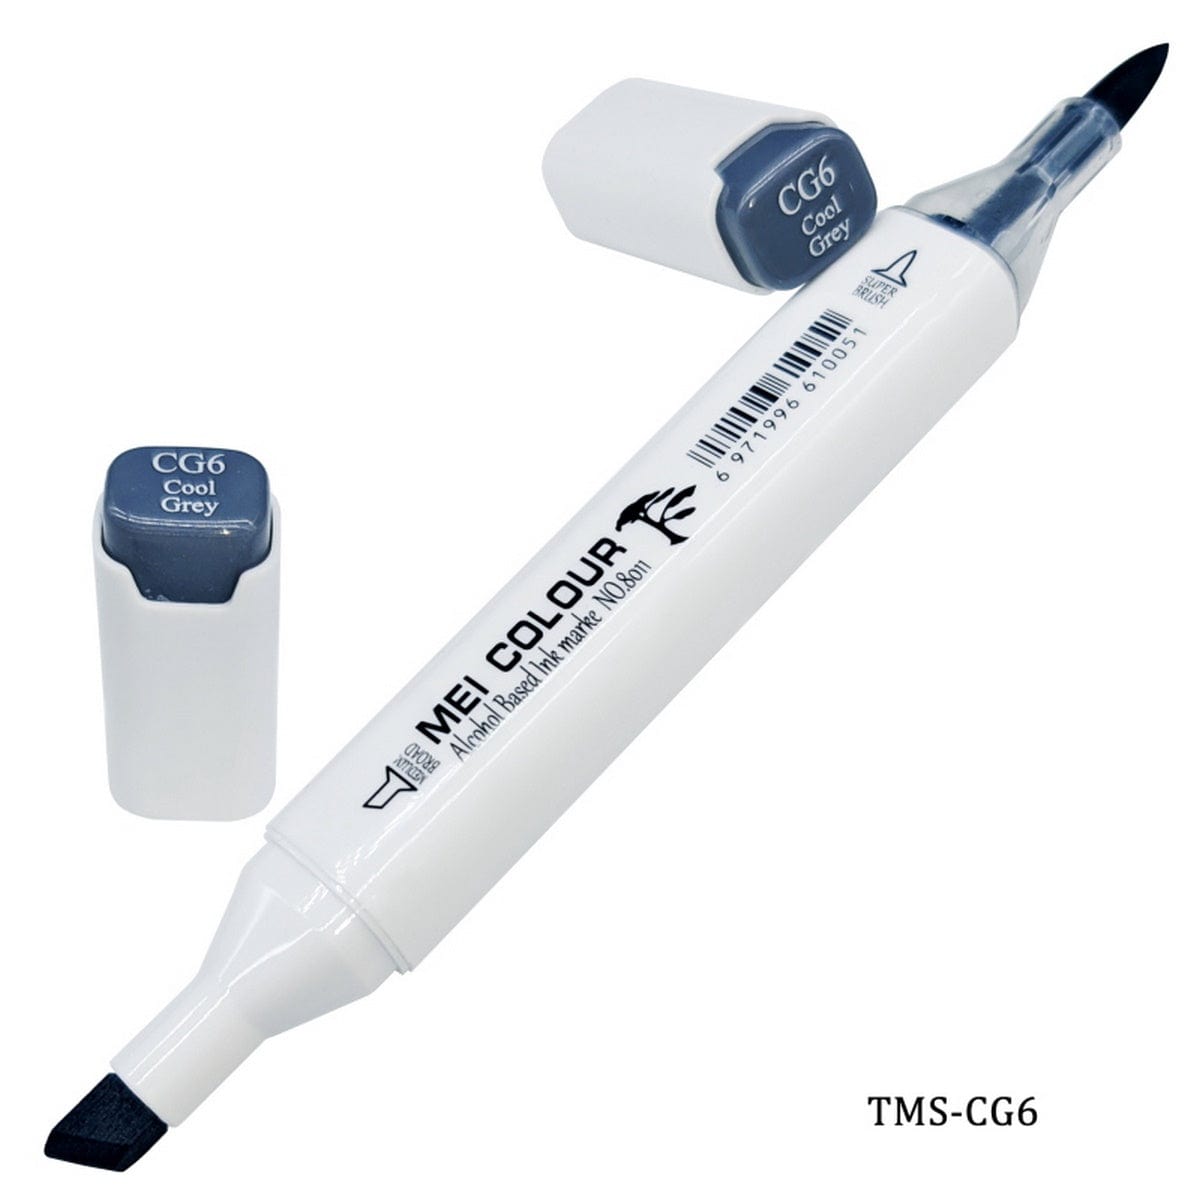 jags-mumbai Marker Touch Marker Soft 2in1 Pen Cool Grey TMS-CG6